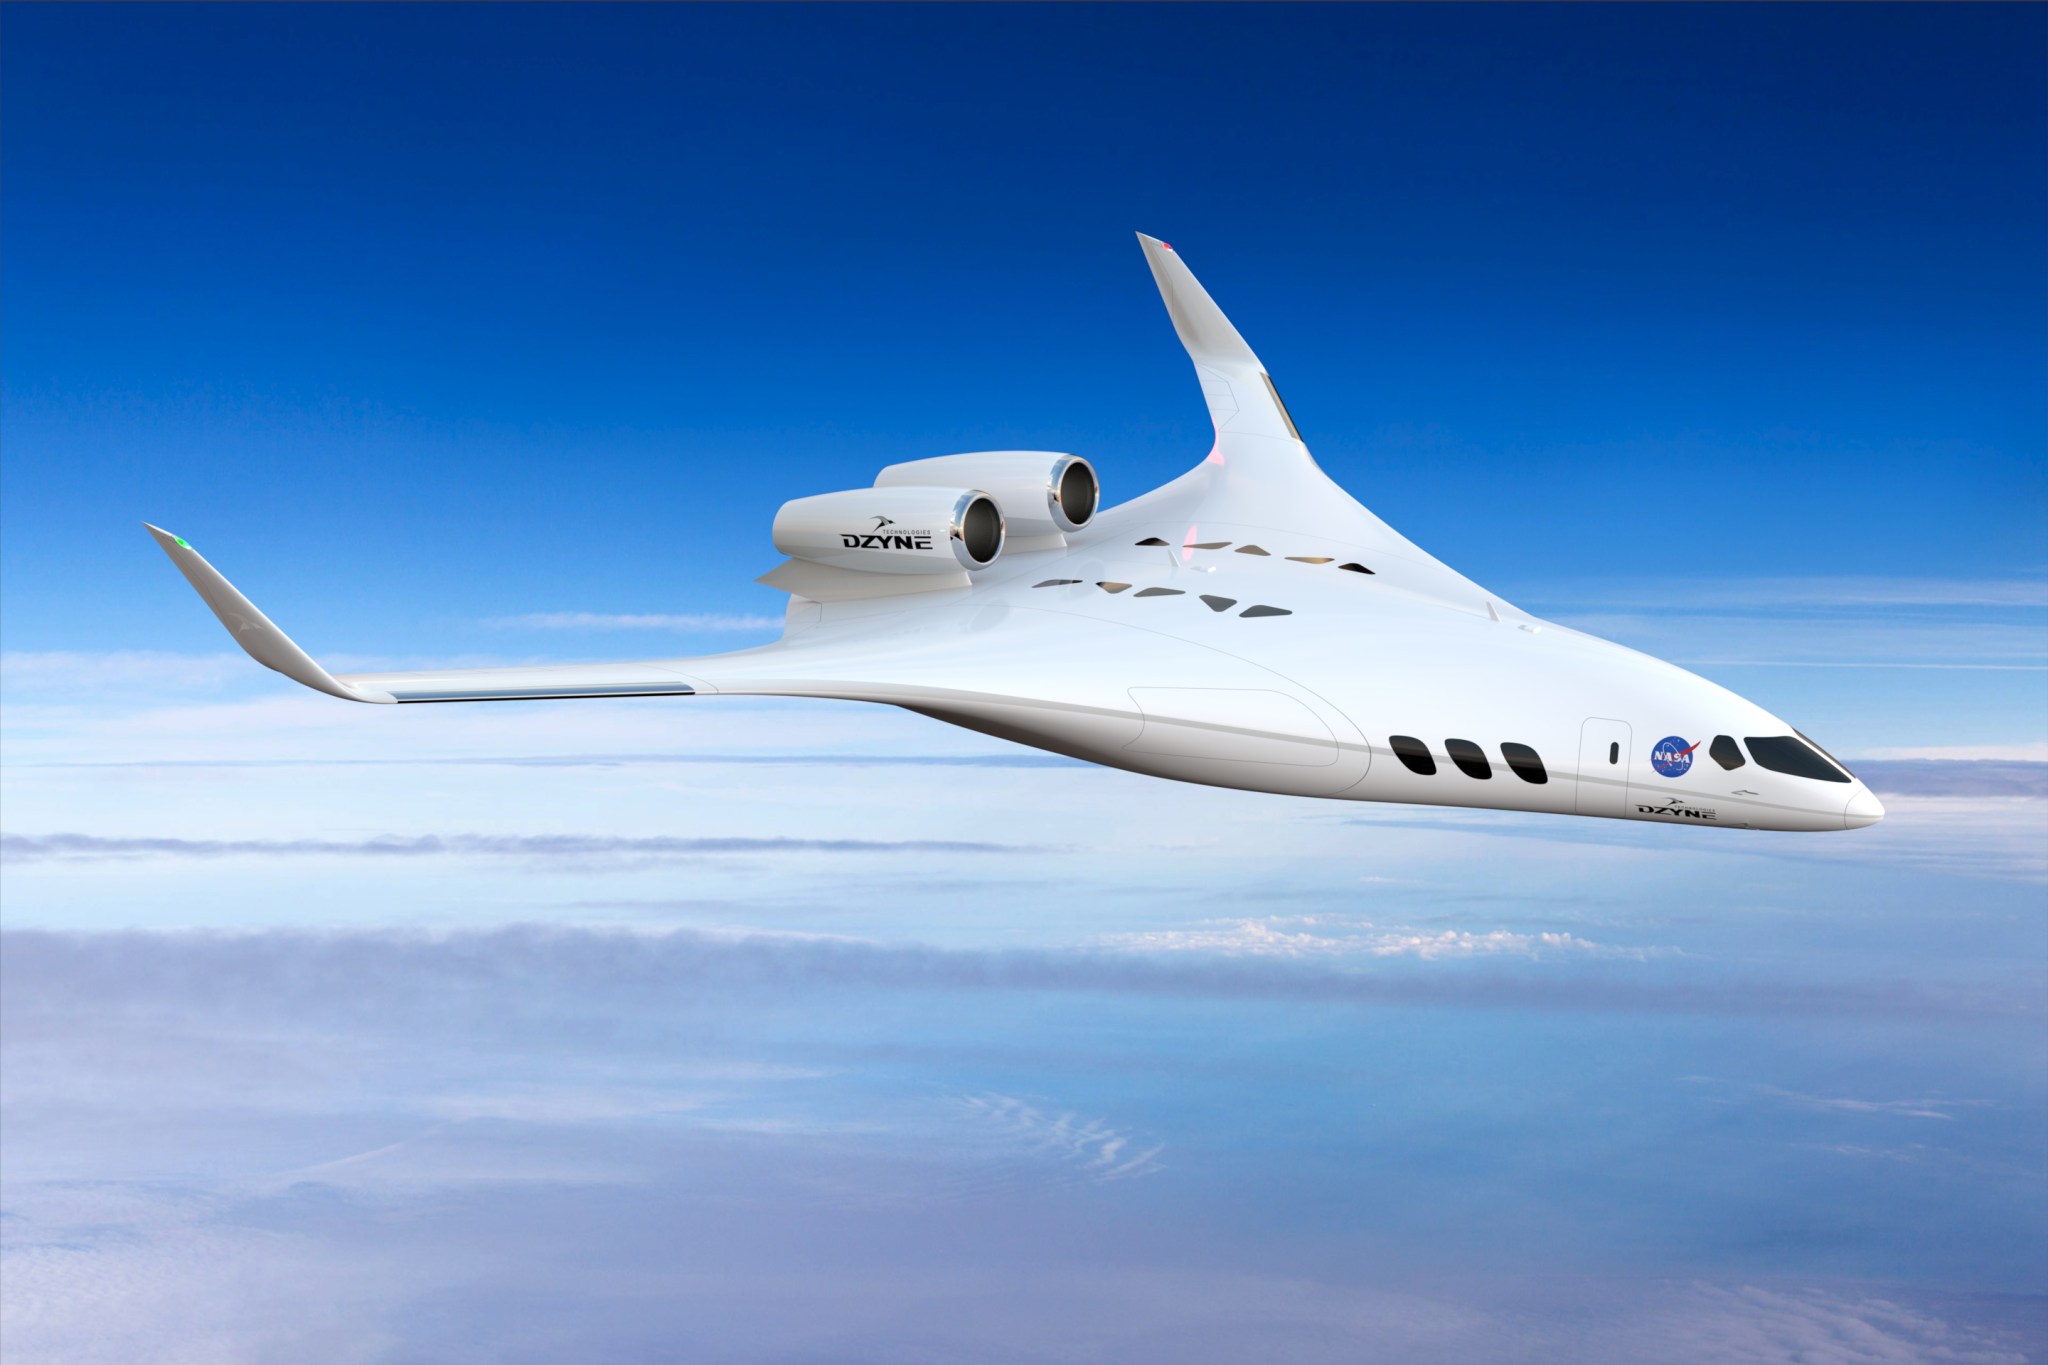 Dzyne Technologies’ blended wing body concept in flight.